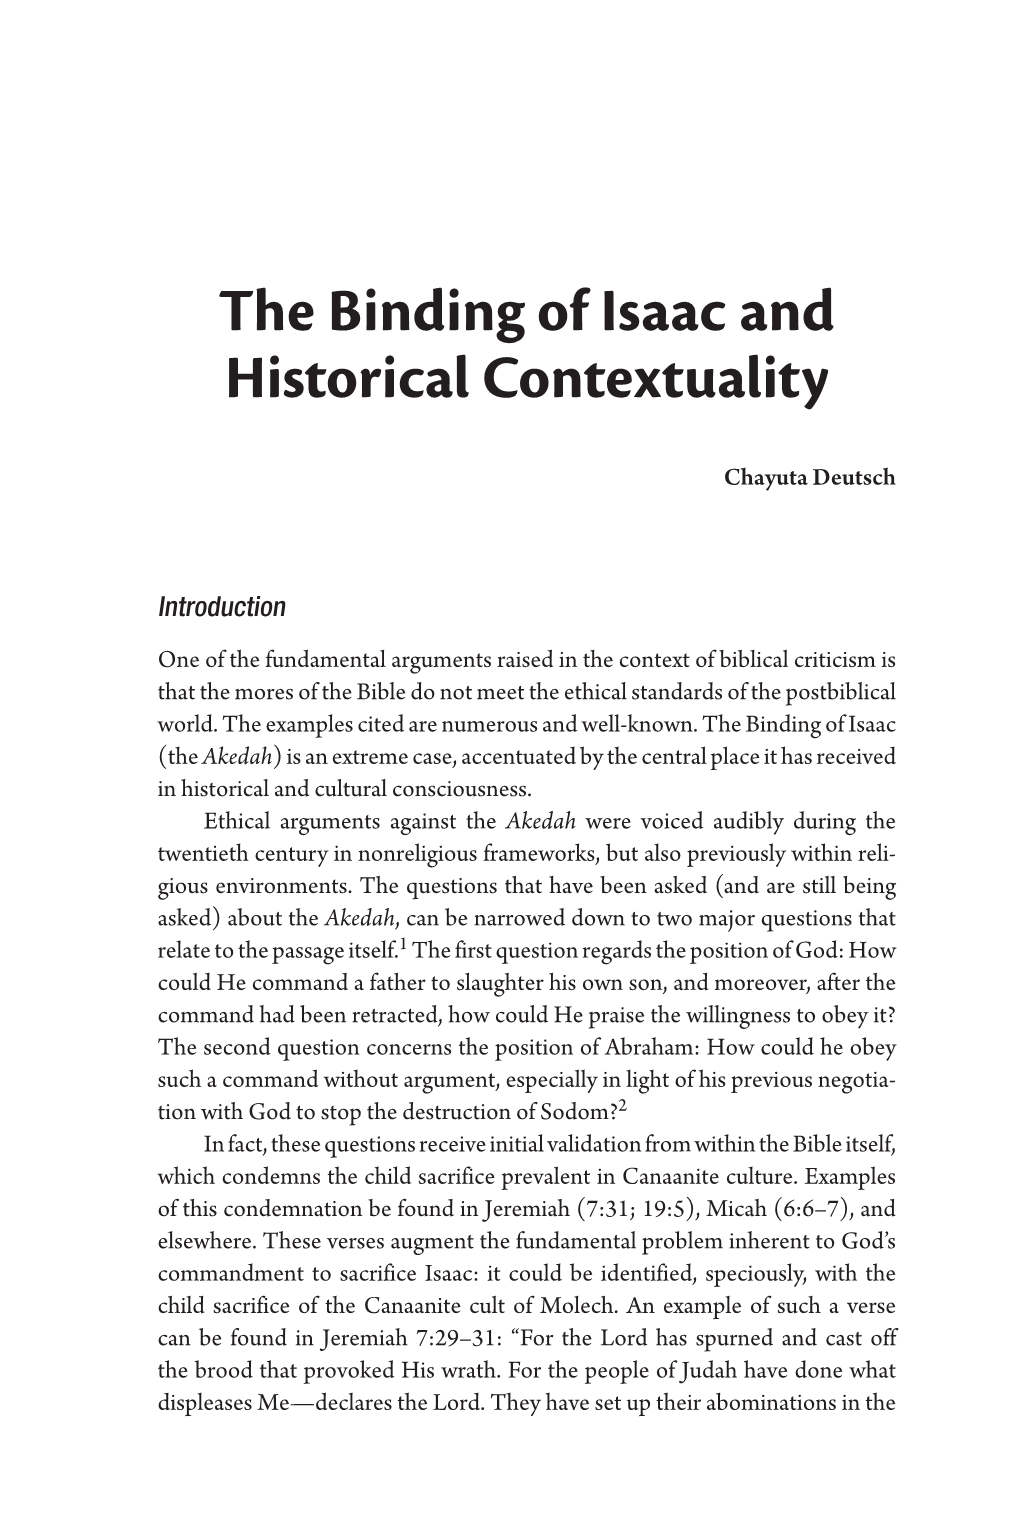 The Binding of Isaac and Historical Contextuality